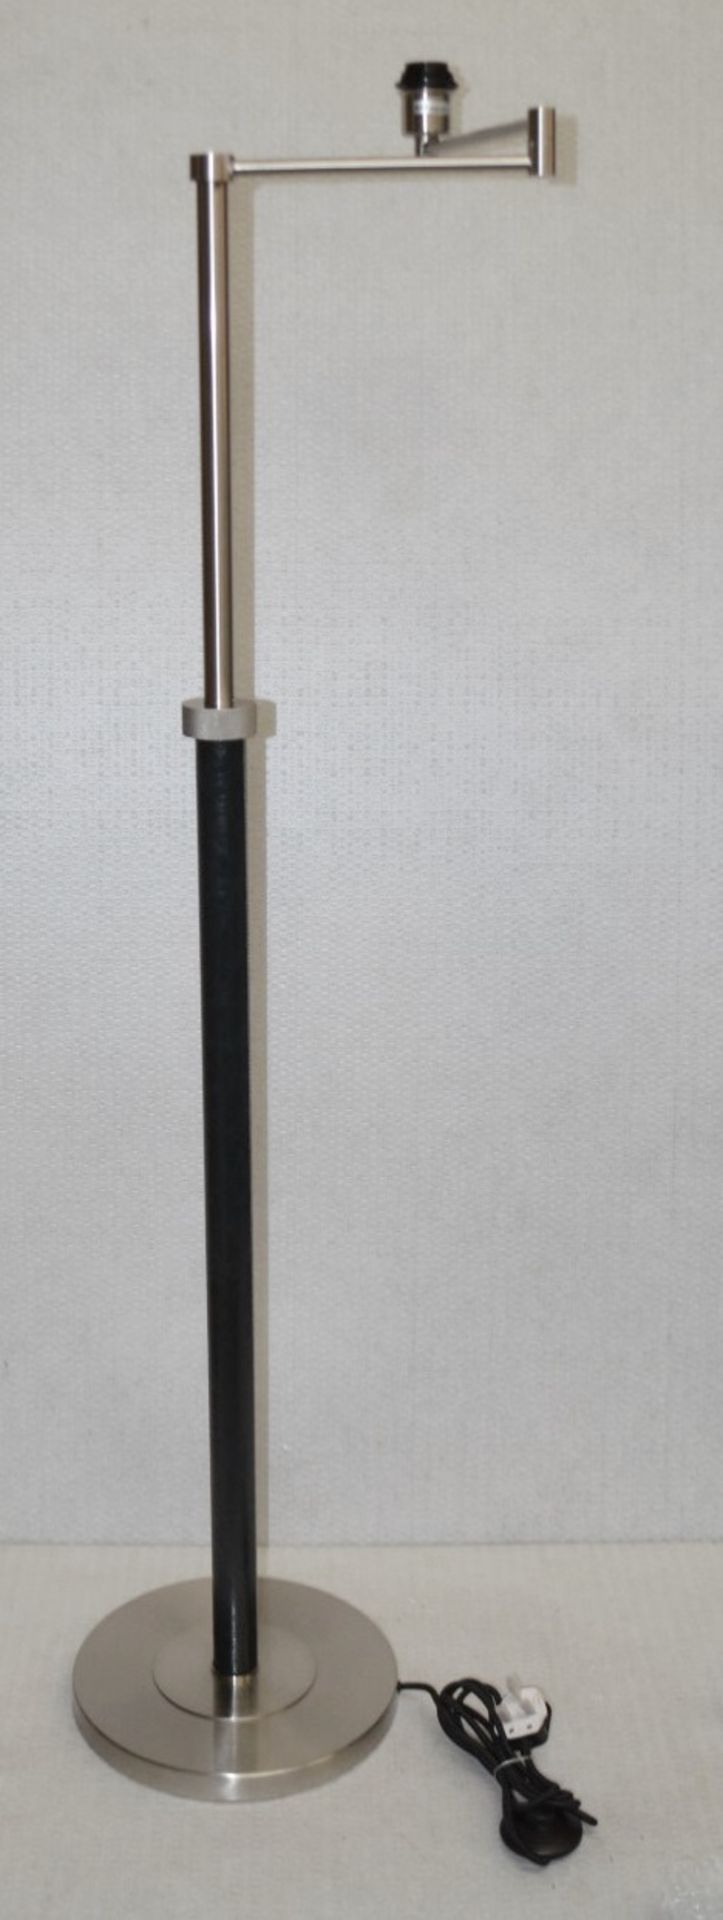 1 x CHELSOM Freestanding Floor Lamp Upholstered In Black Leather With A Brushed Steel Swing-Arm - Image 7 of 14